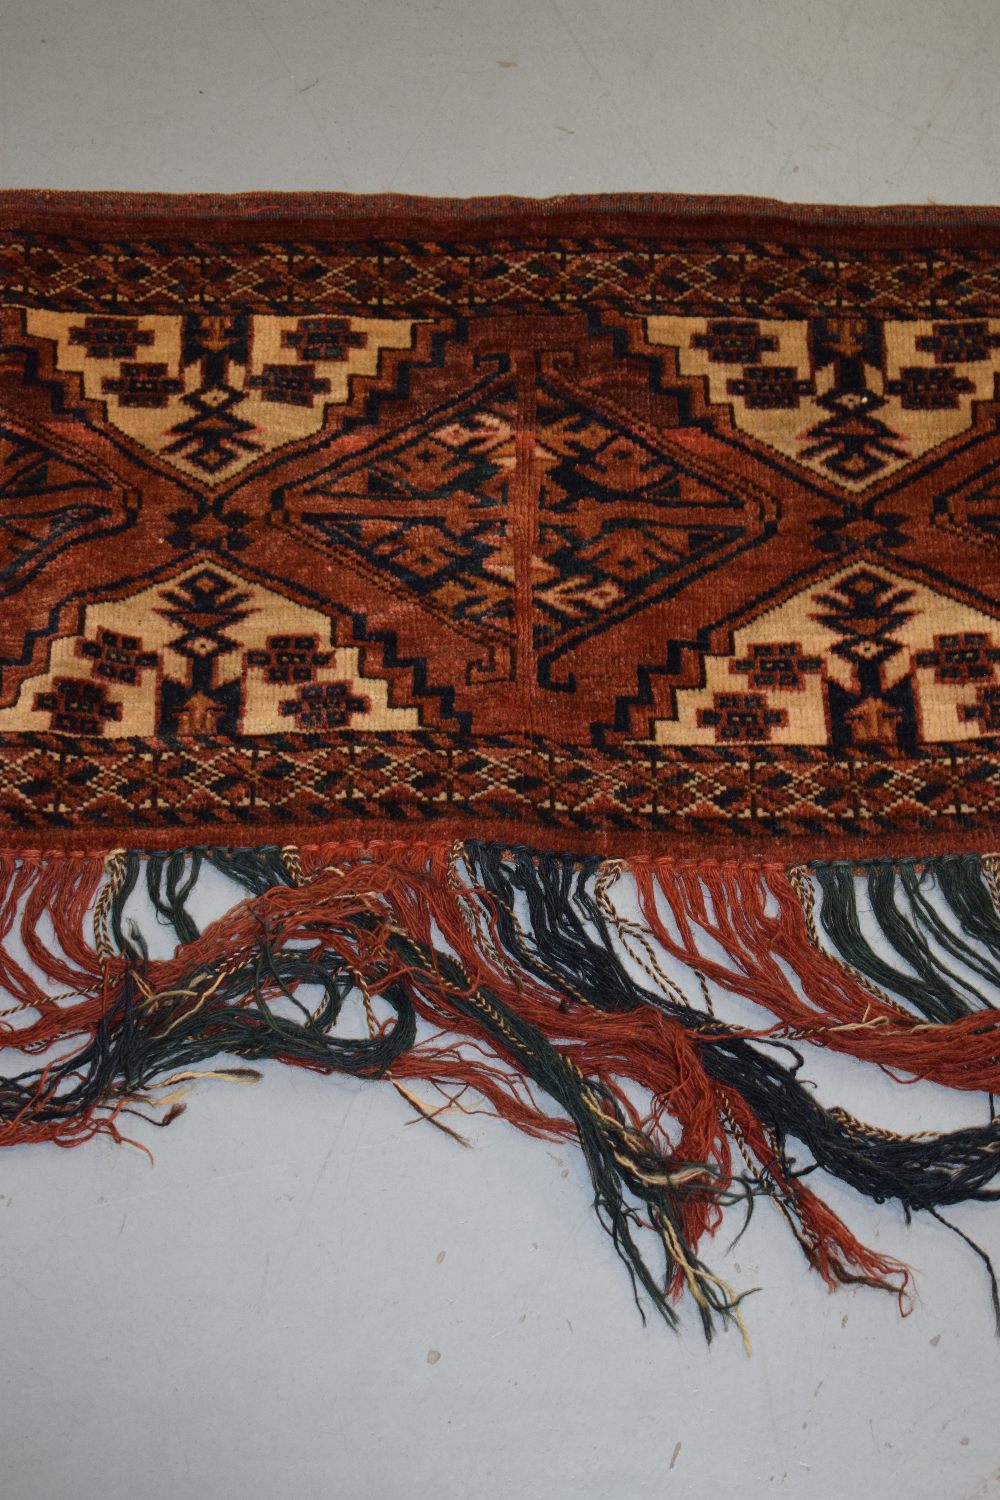 Kizil Ayak jollar, Turkmenistan, late 19th/early 20th century, 1ft. 5in. X 4ft. 5in. 0.43m. x 1.35m. - Image 3 of 6